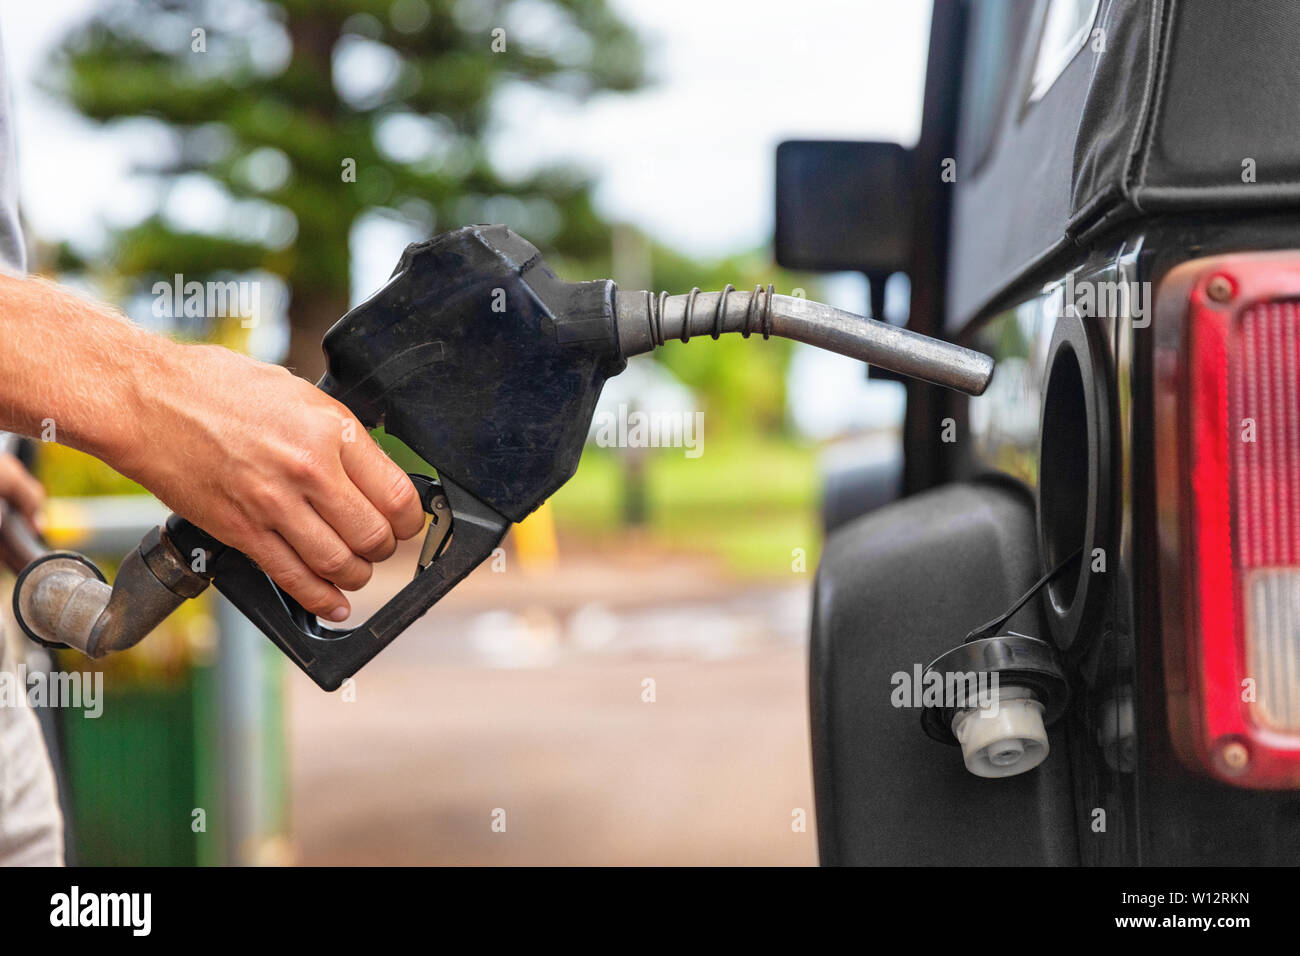 Gas station pump. Man filling gasoline fuel in car holding nozzle. Close up. Stock Photo